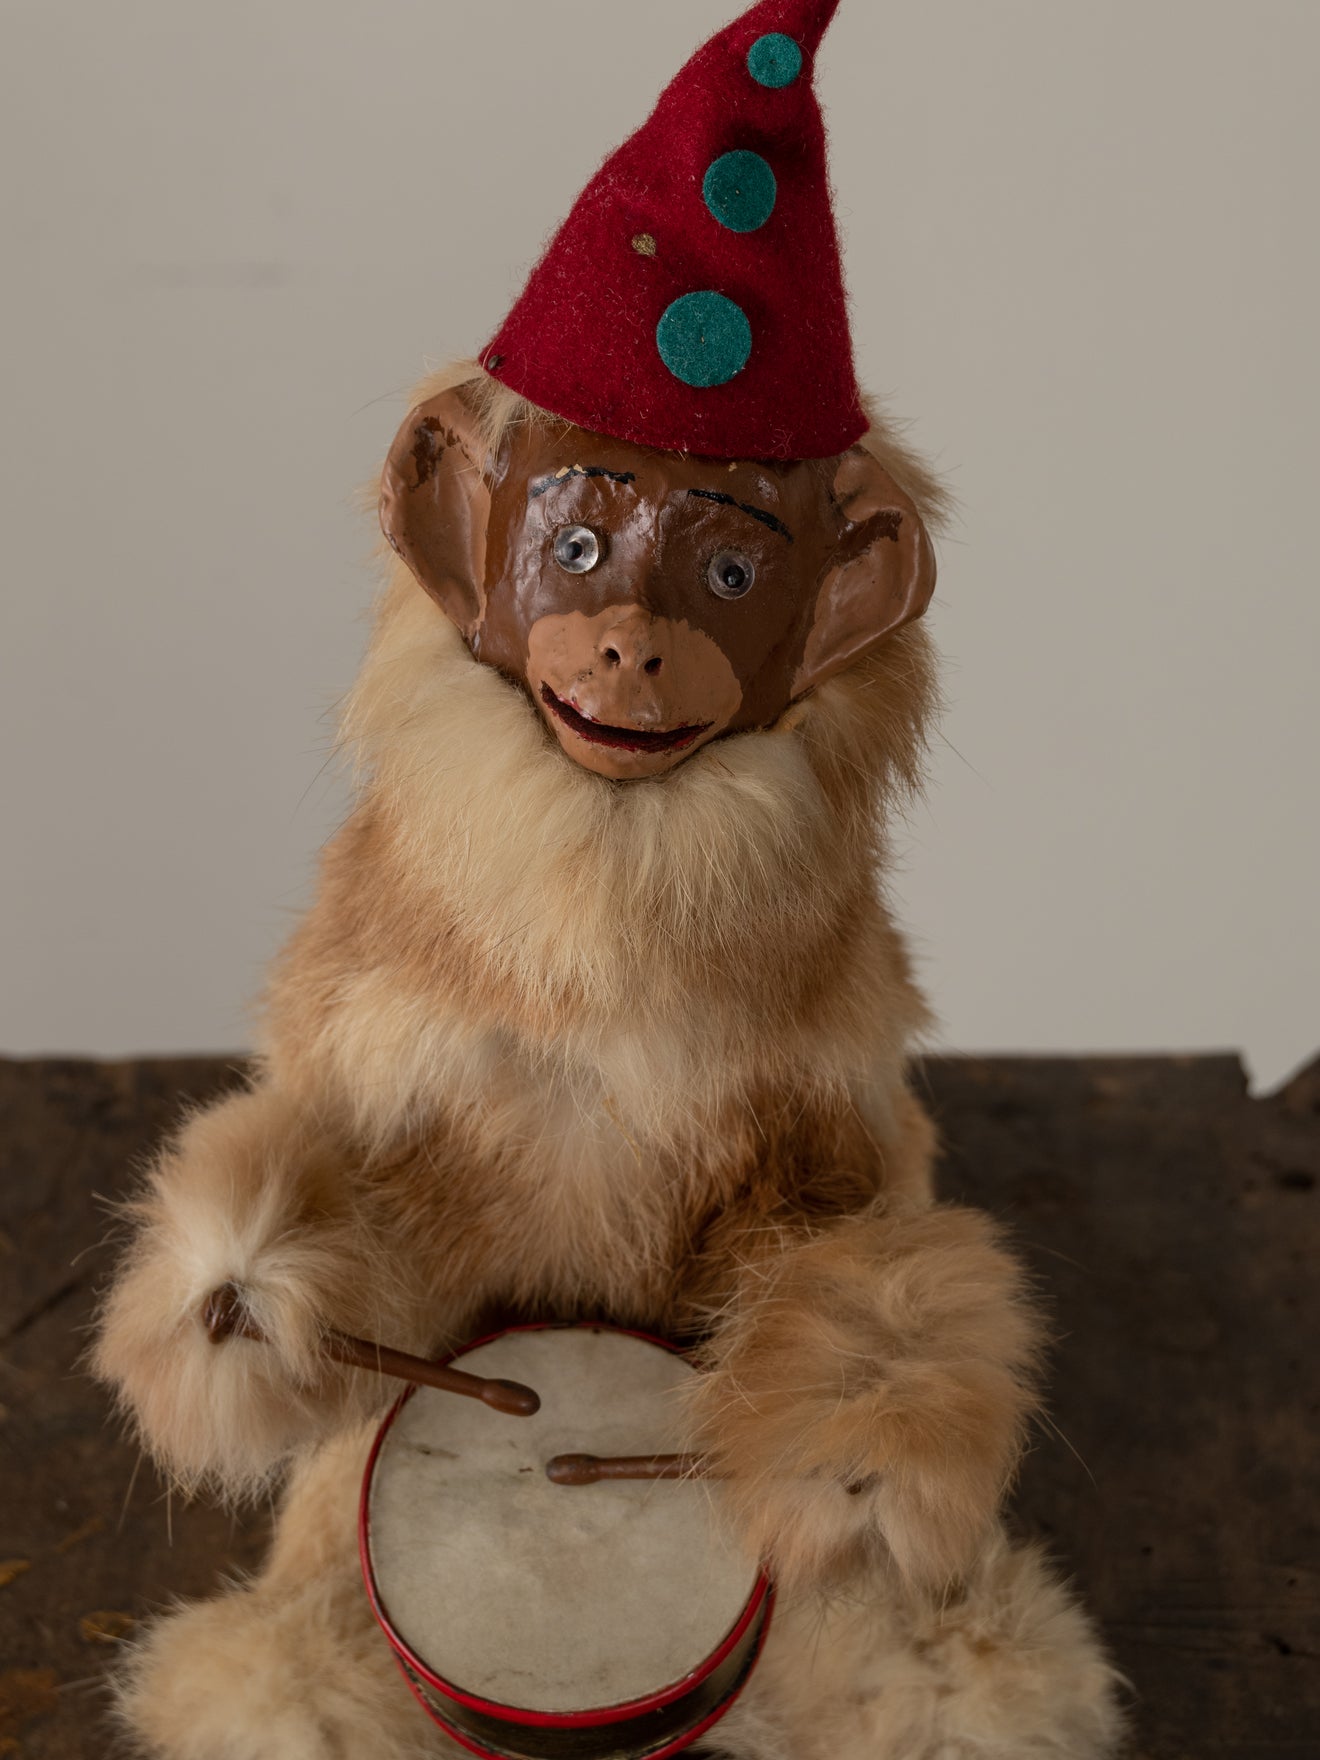 DRUMMING MONKEY AUTOMATON BY ROULLET ET DECAMPS